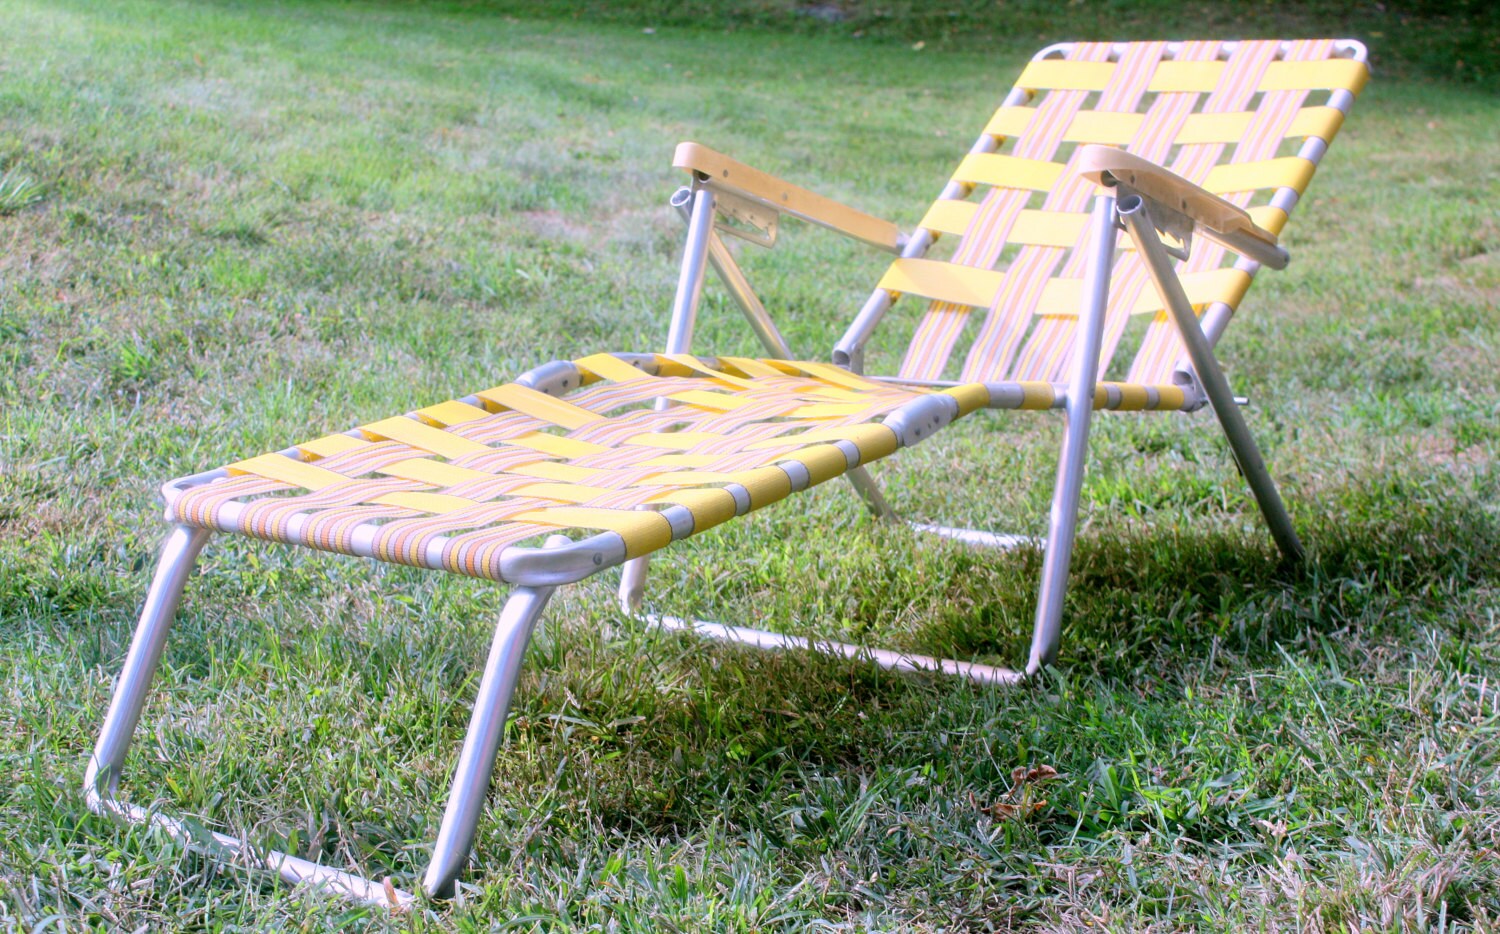 Vintage Aluminum Folding Chaise Lounge Chair Retro by OneDecember